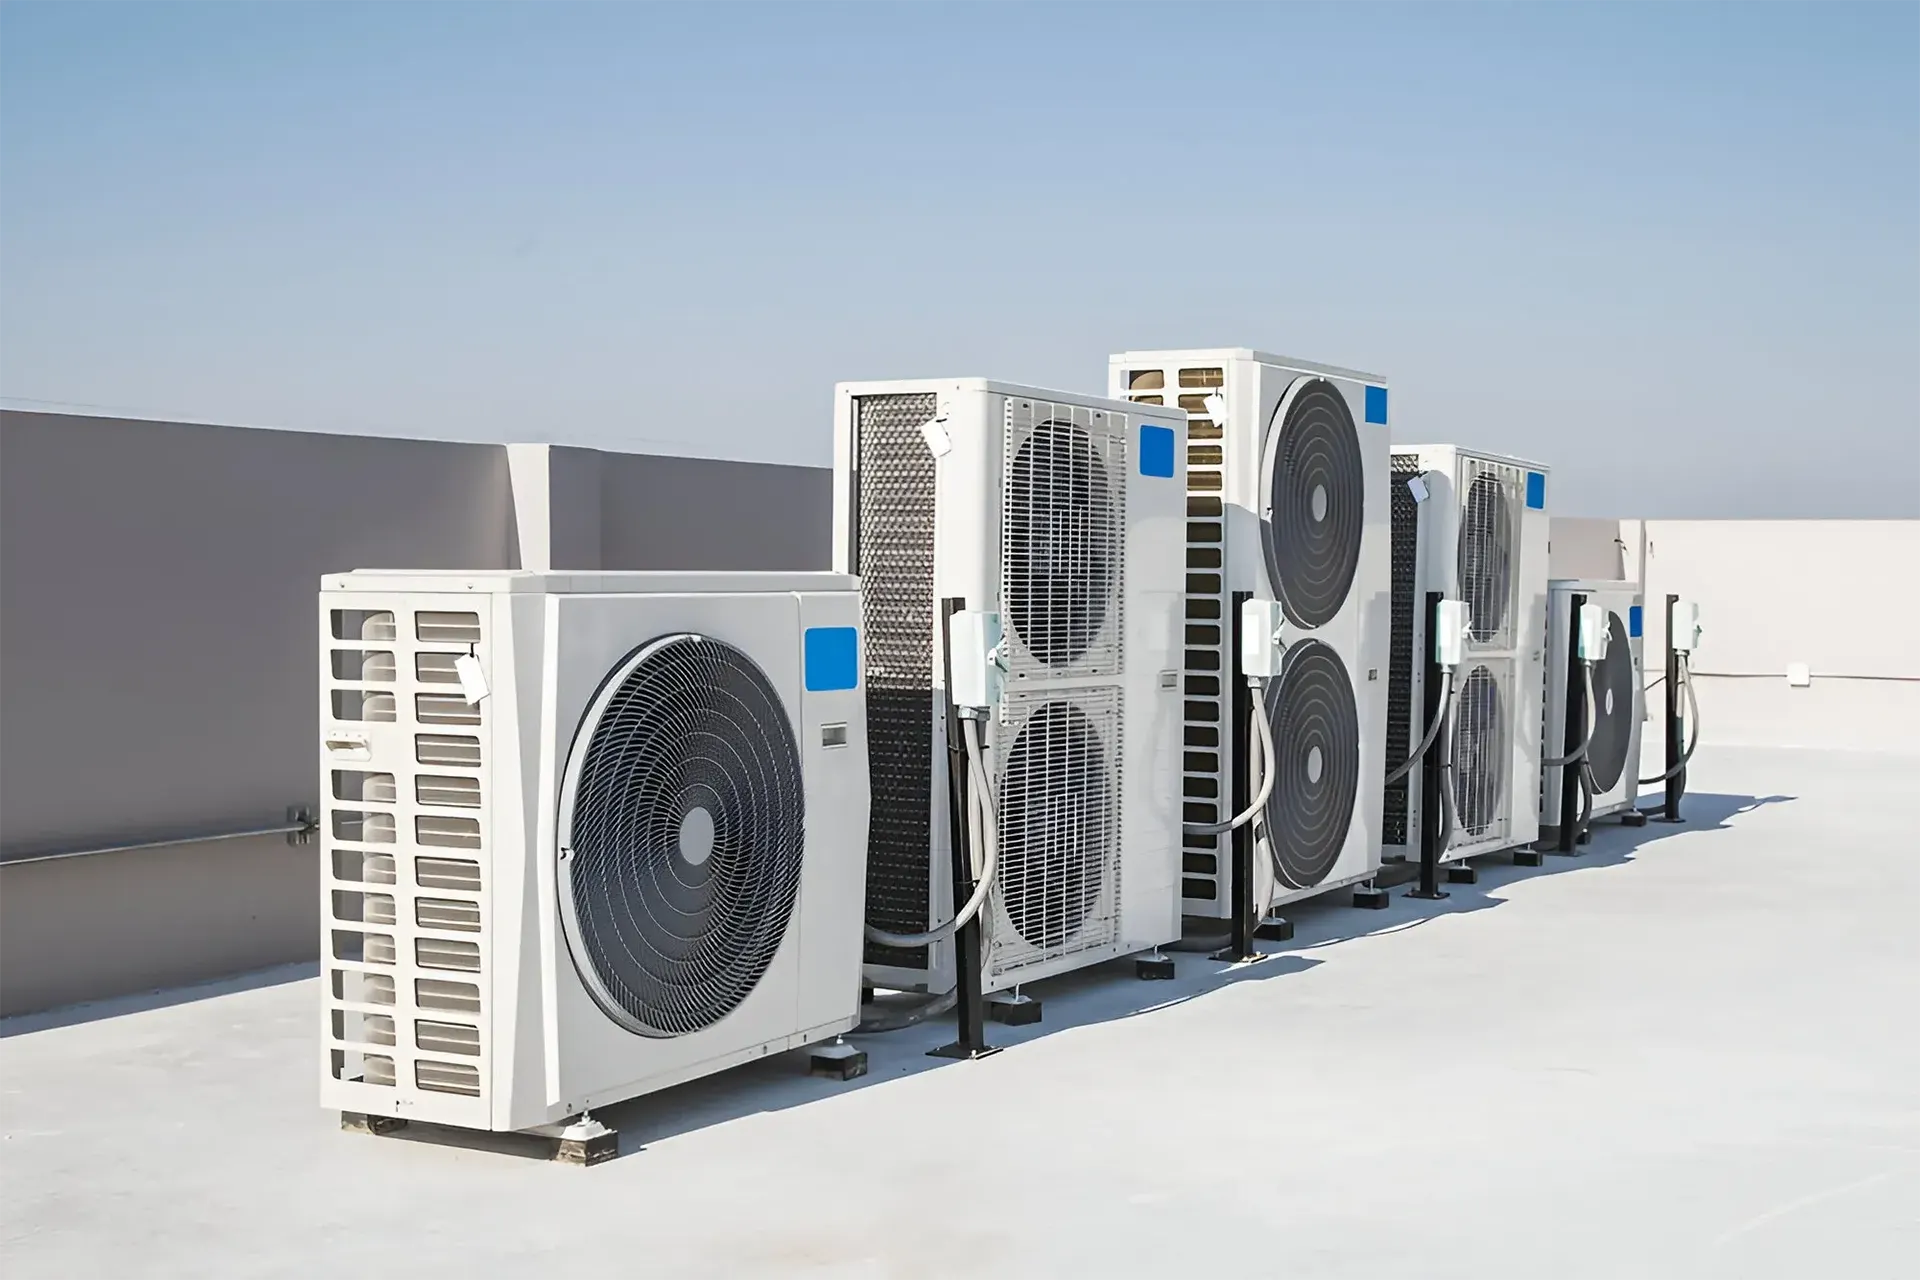 Our service for installing compressors, fans, and controllers is essential to ensure the efficient and reliable operation of refrigeration and air conditioning systems. We have a team of highly trained and experienced technicians who can expertly install and configure these components to guarantee optimal performance.